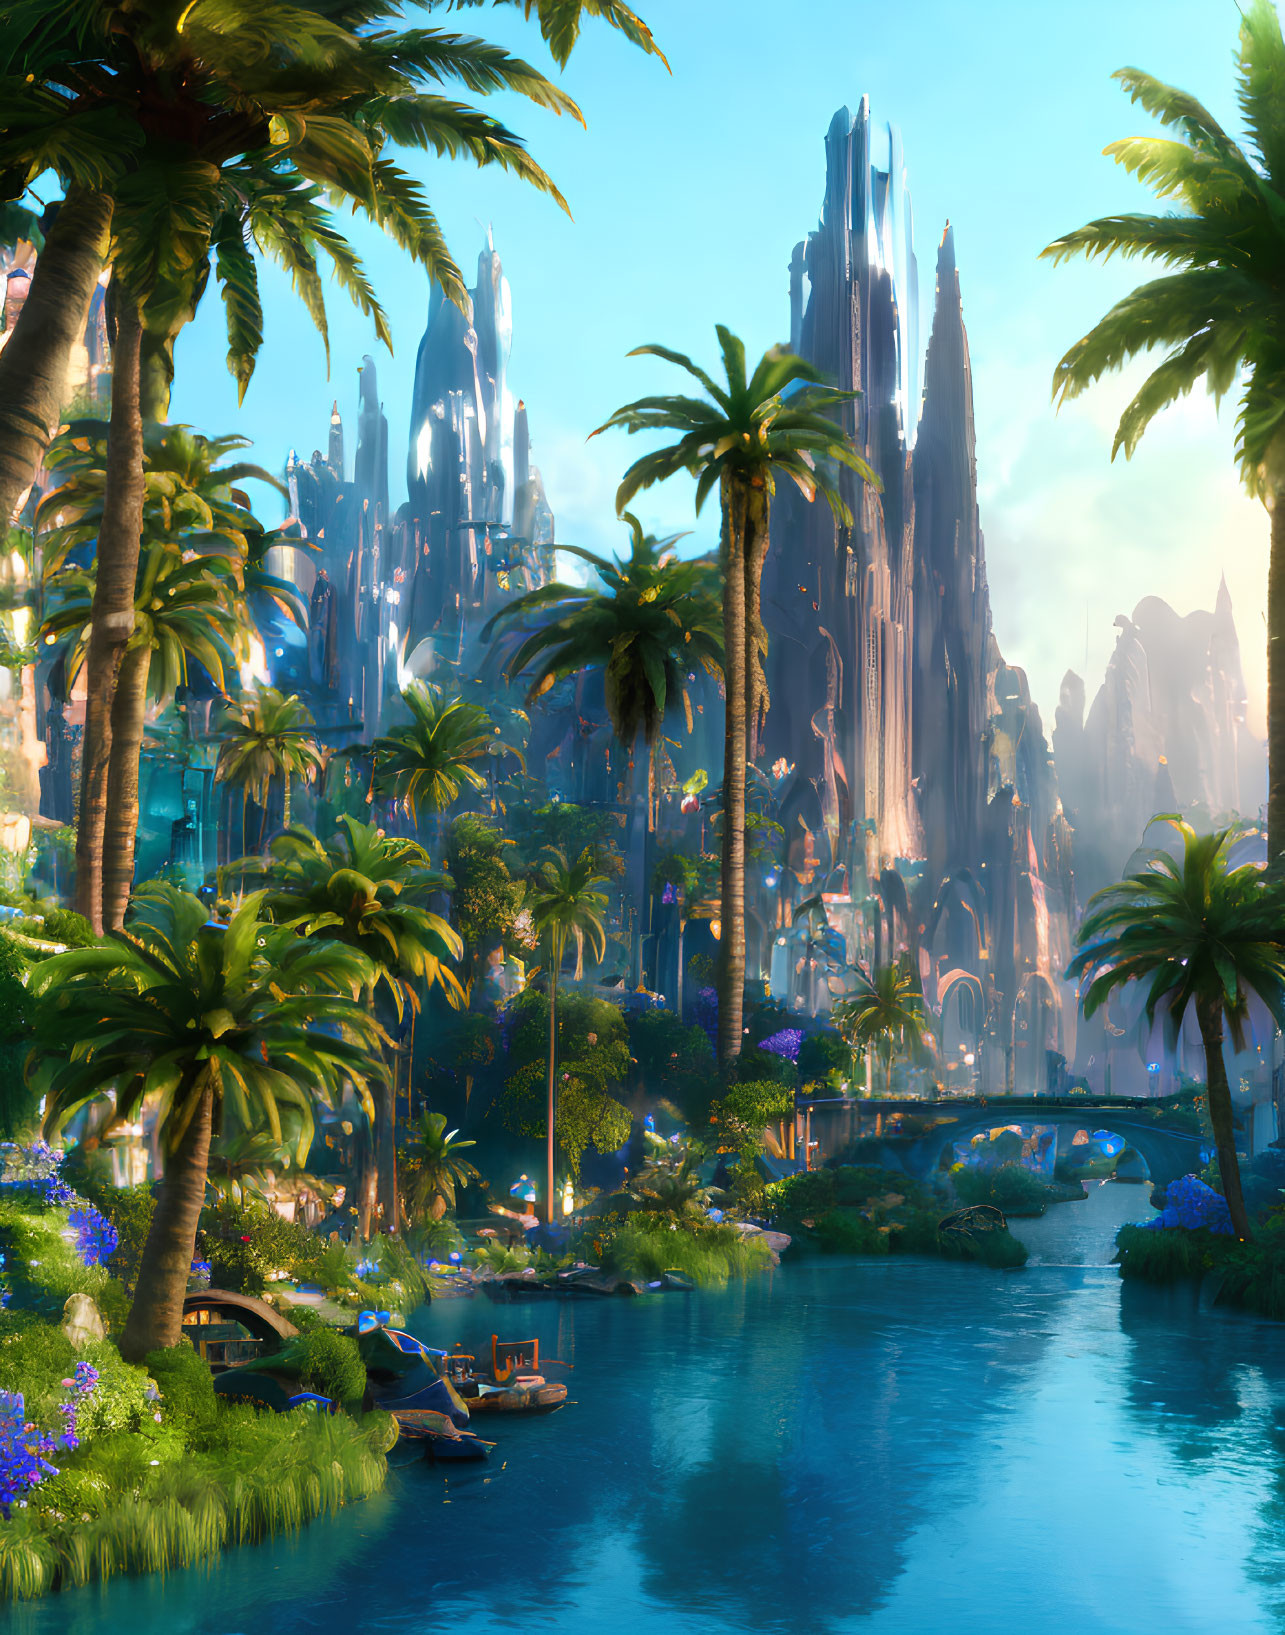 Fantastical landscape with lush greenery, palm trees, serene river, and crystal-like spires